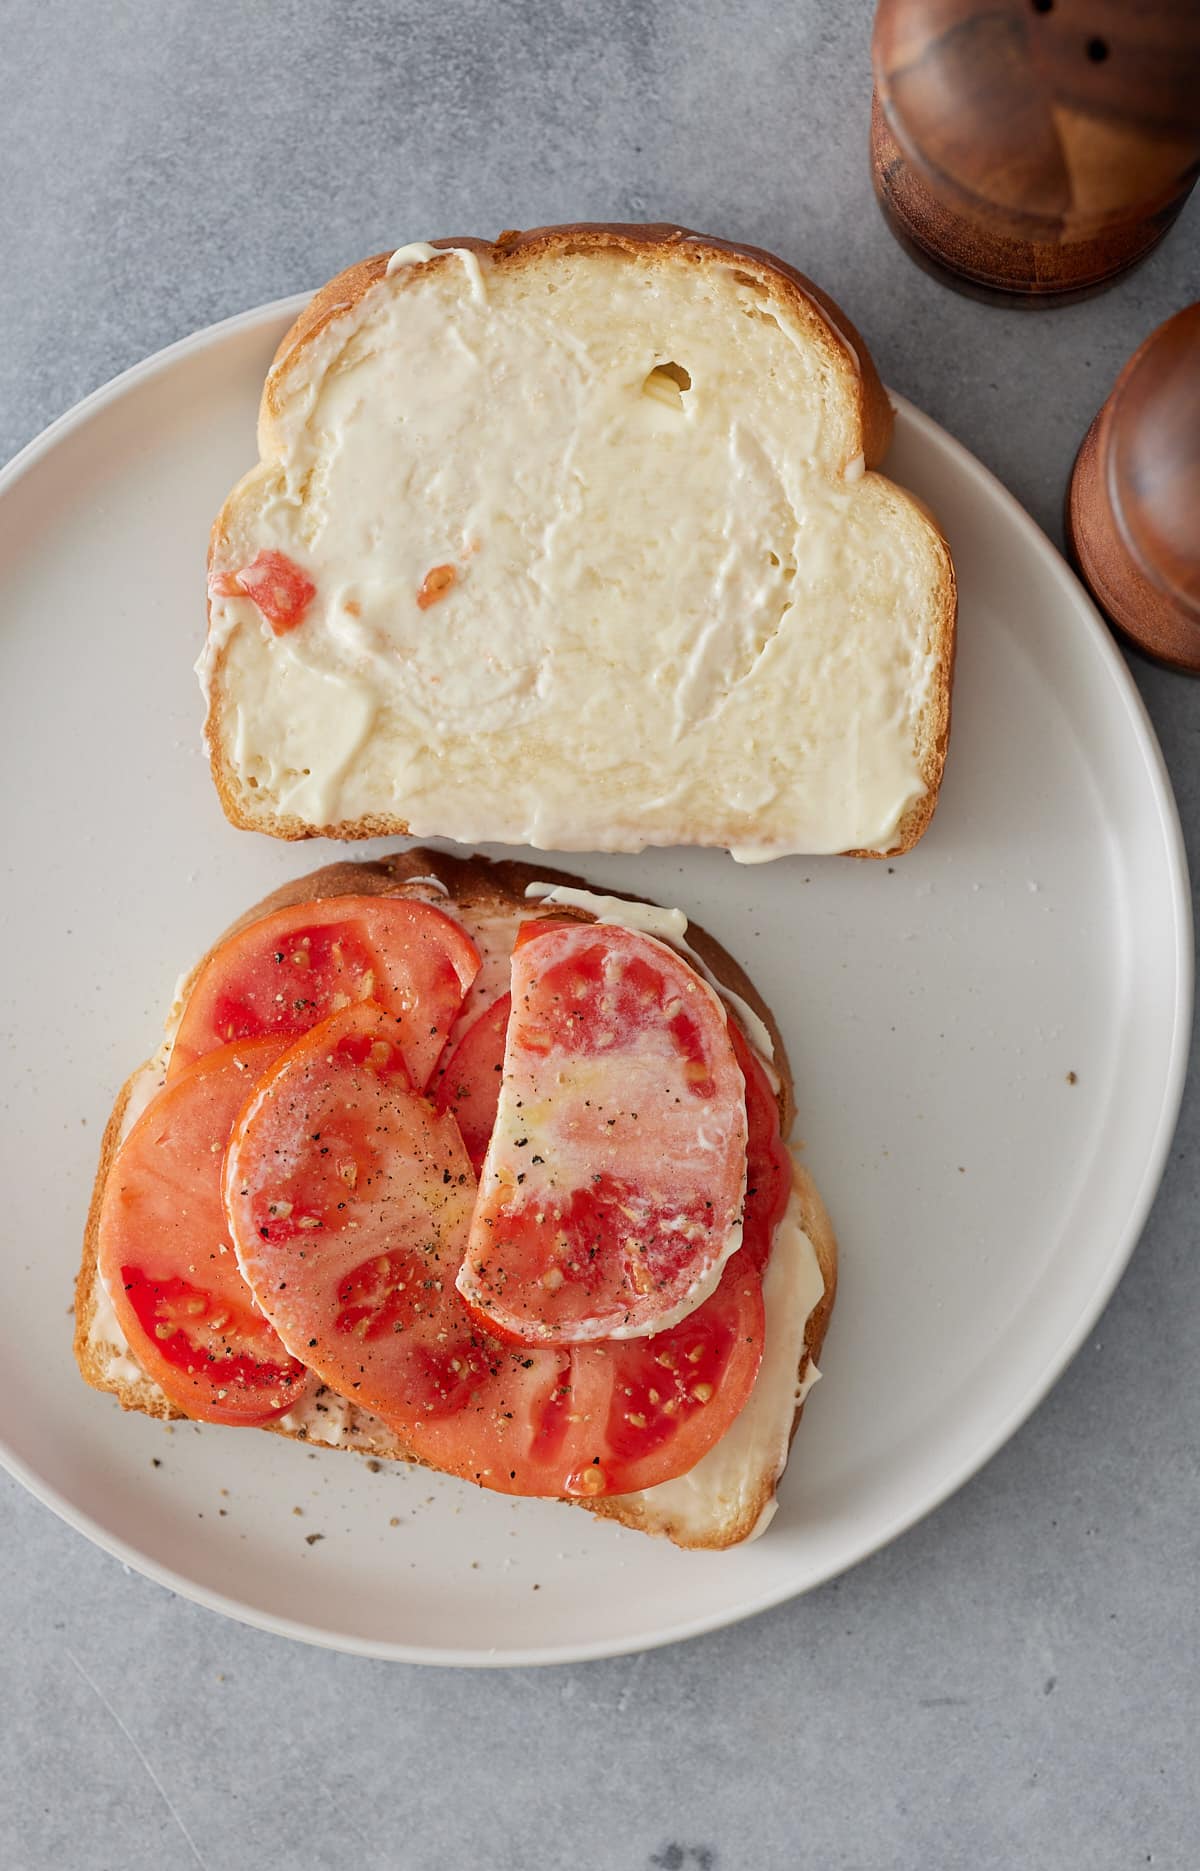 Top down image of white plate with 2 slices of sandwich bread spread with mayonnaise and sliced tomatoes on one half of the sandwich